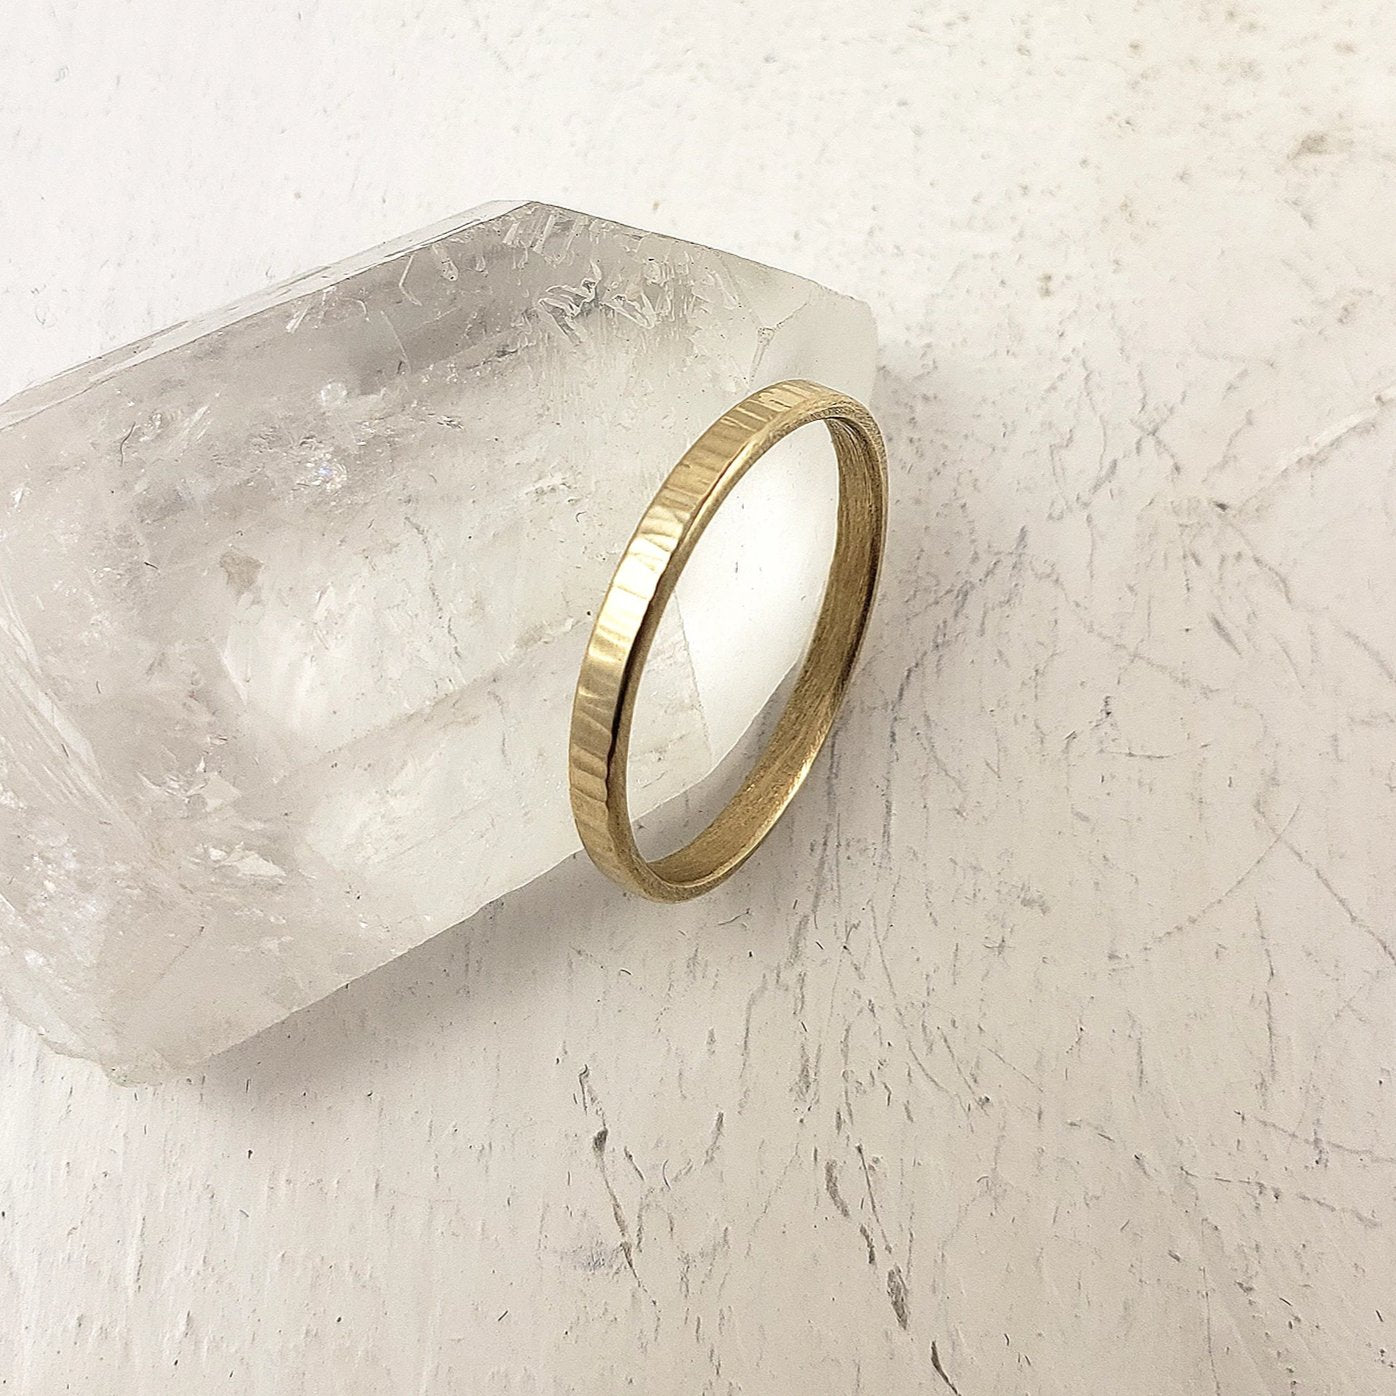 Handmade in Canada solid yellow gold wedding band, 14k gold ring for her